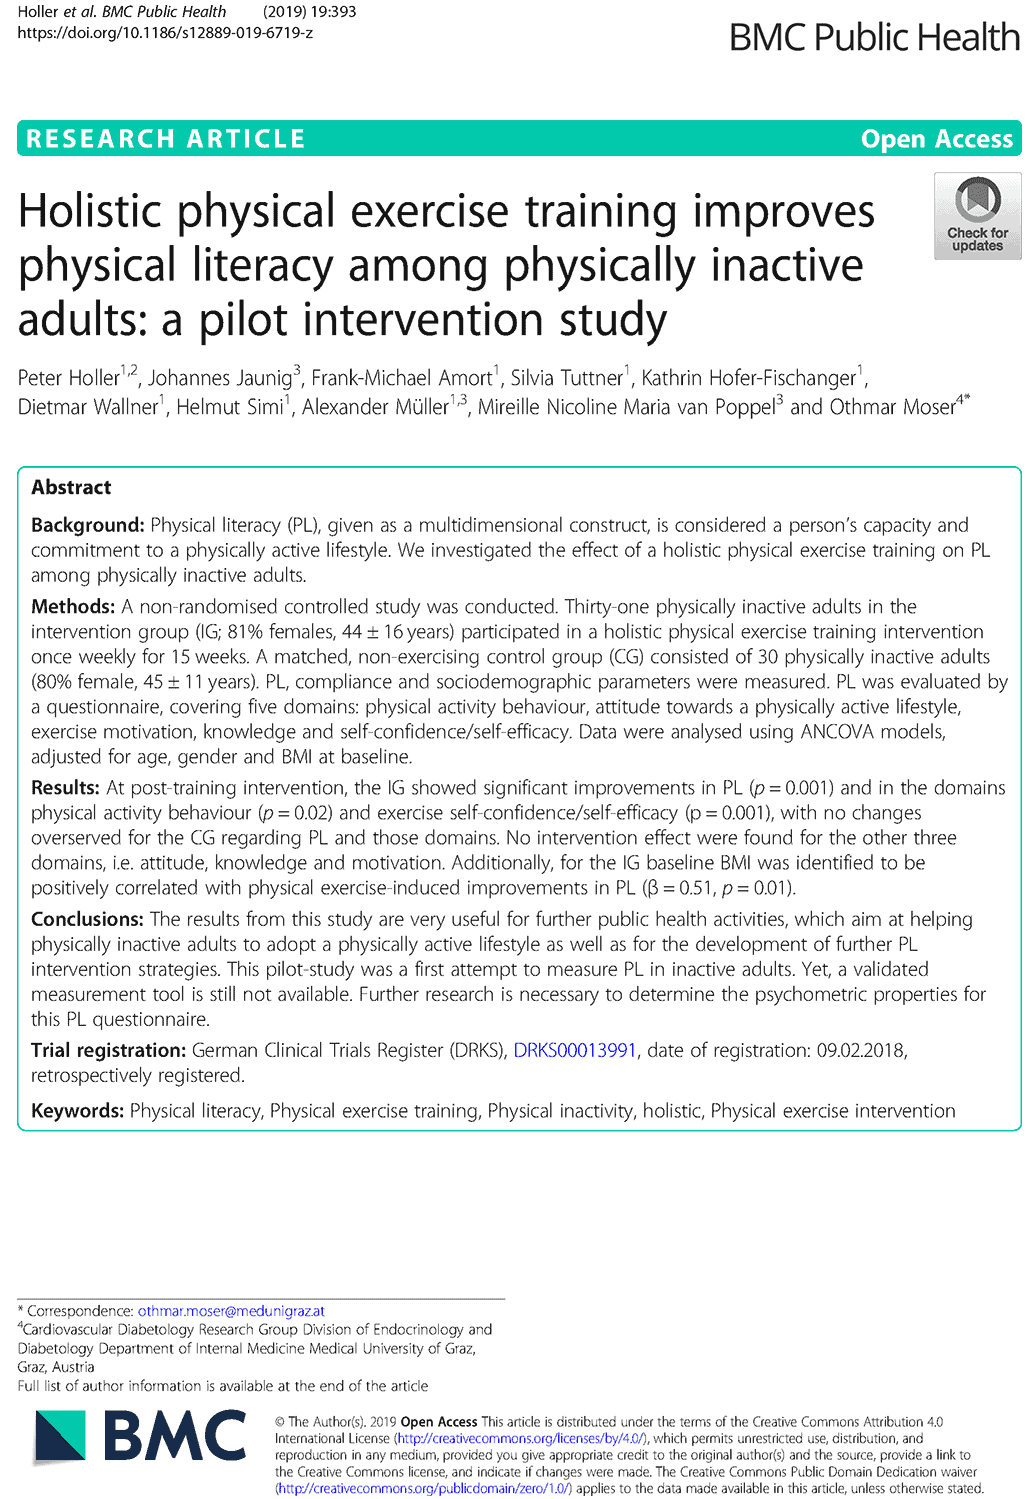 Holistic physical exercise training improves physical literacy among physically inactive adults – a pilot intervention study